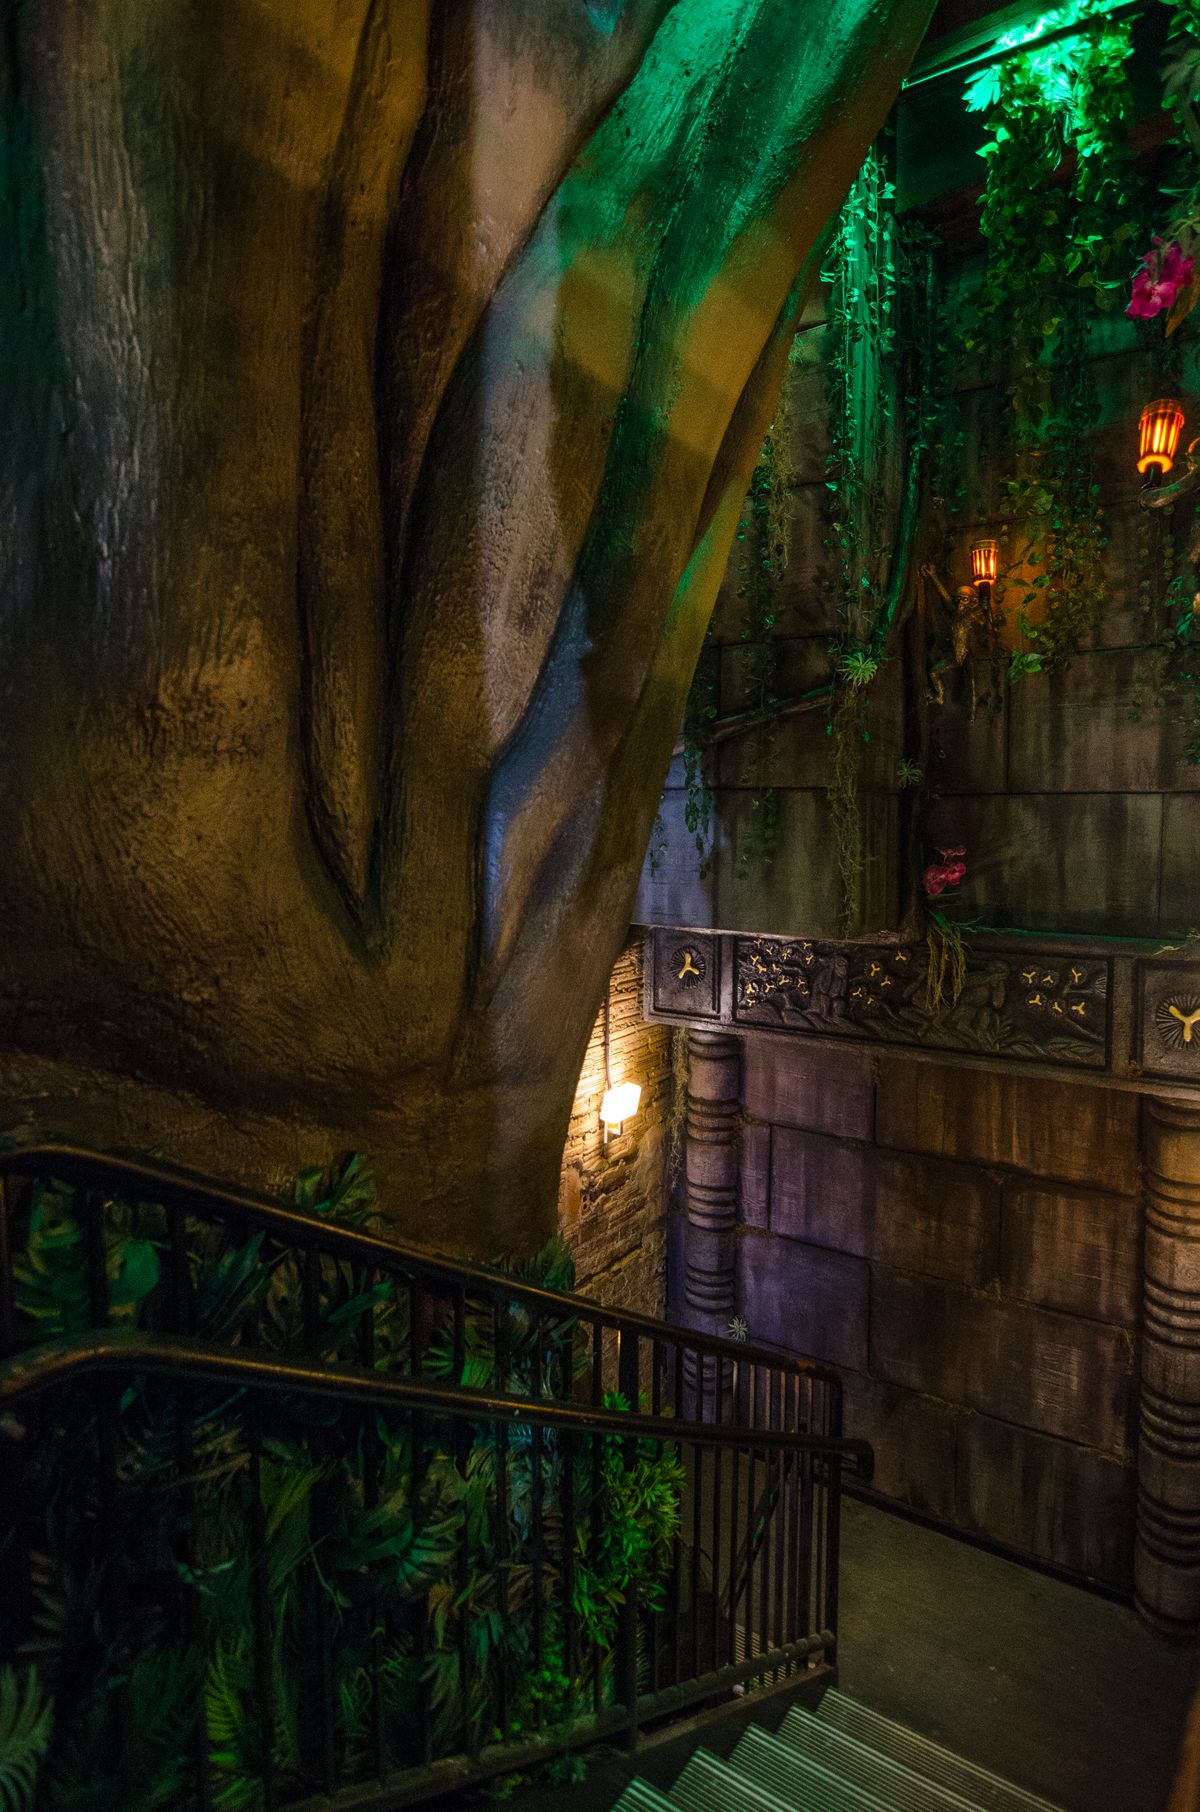 A large fake tree and dangling vines, plus a stone wall, decorate a restaurant stairwell.